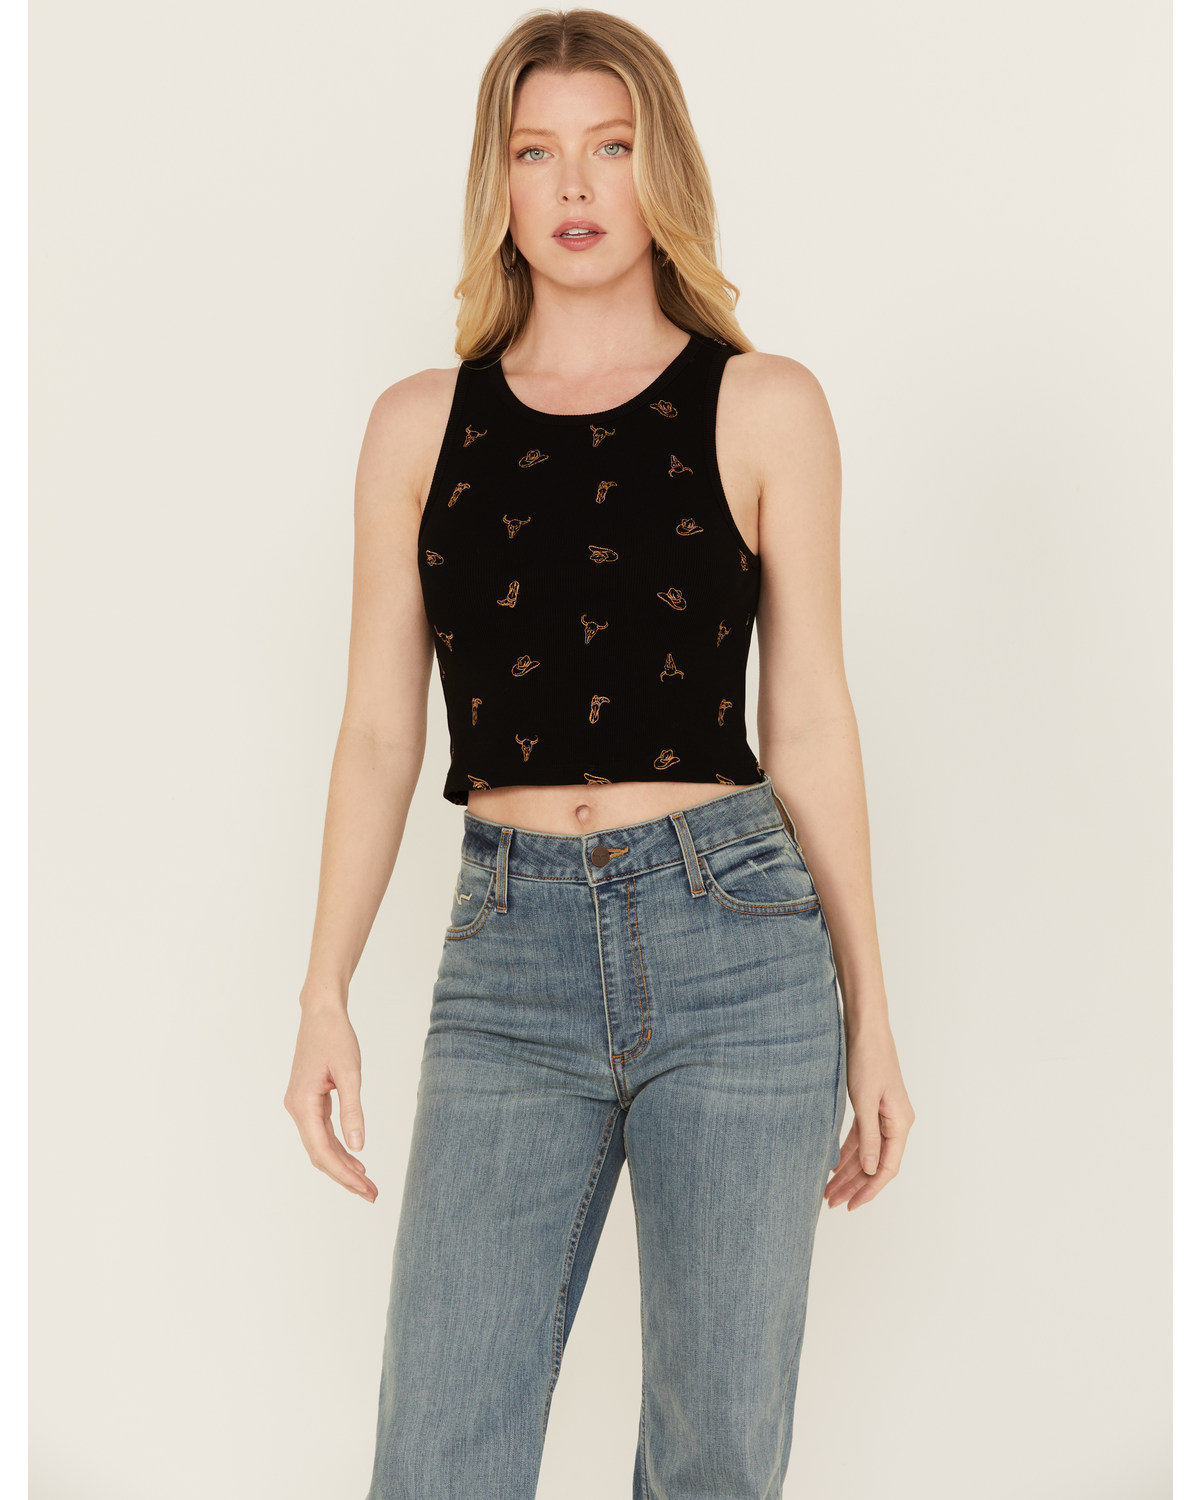 Discreture Women's Western Embroidered Cropped Tank